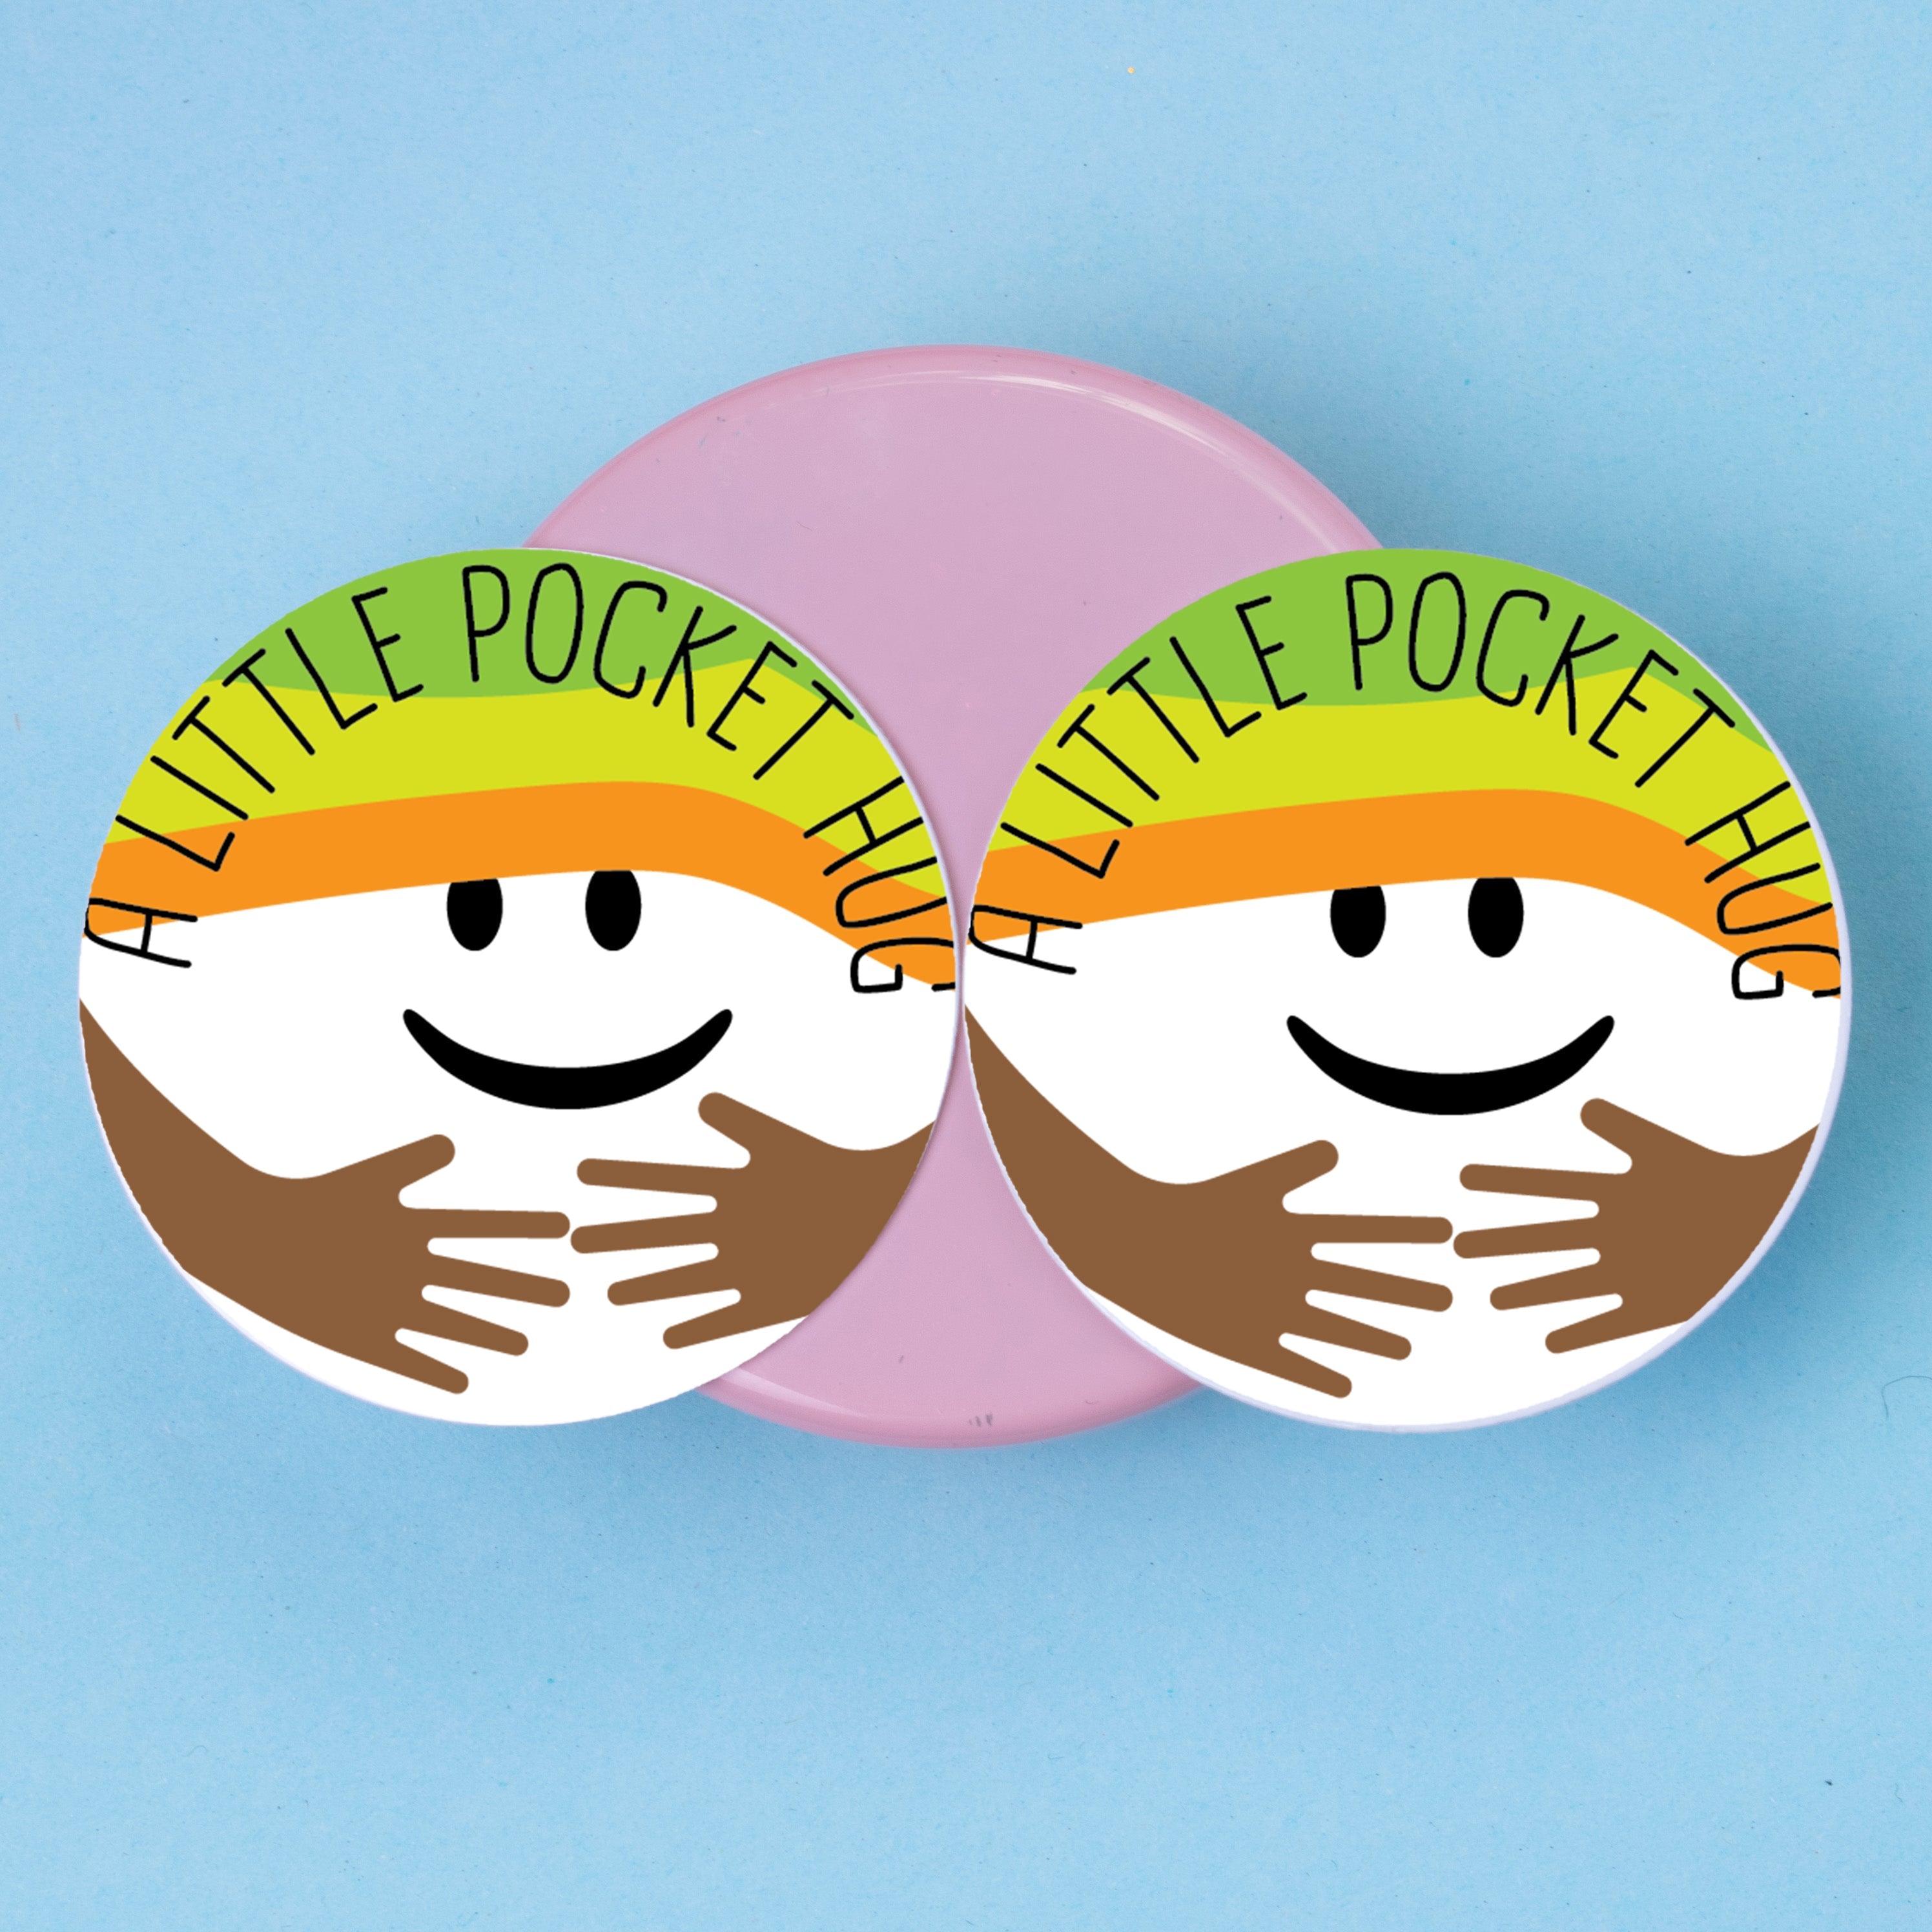 Metal Pocket Hug Tokens - Gift for Her for Him Friends Mum Dad - Double Trouble